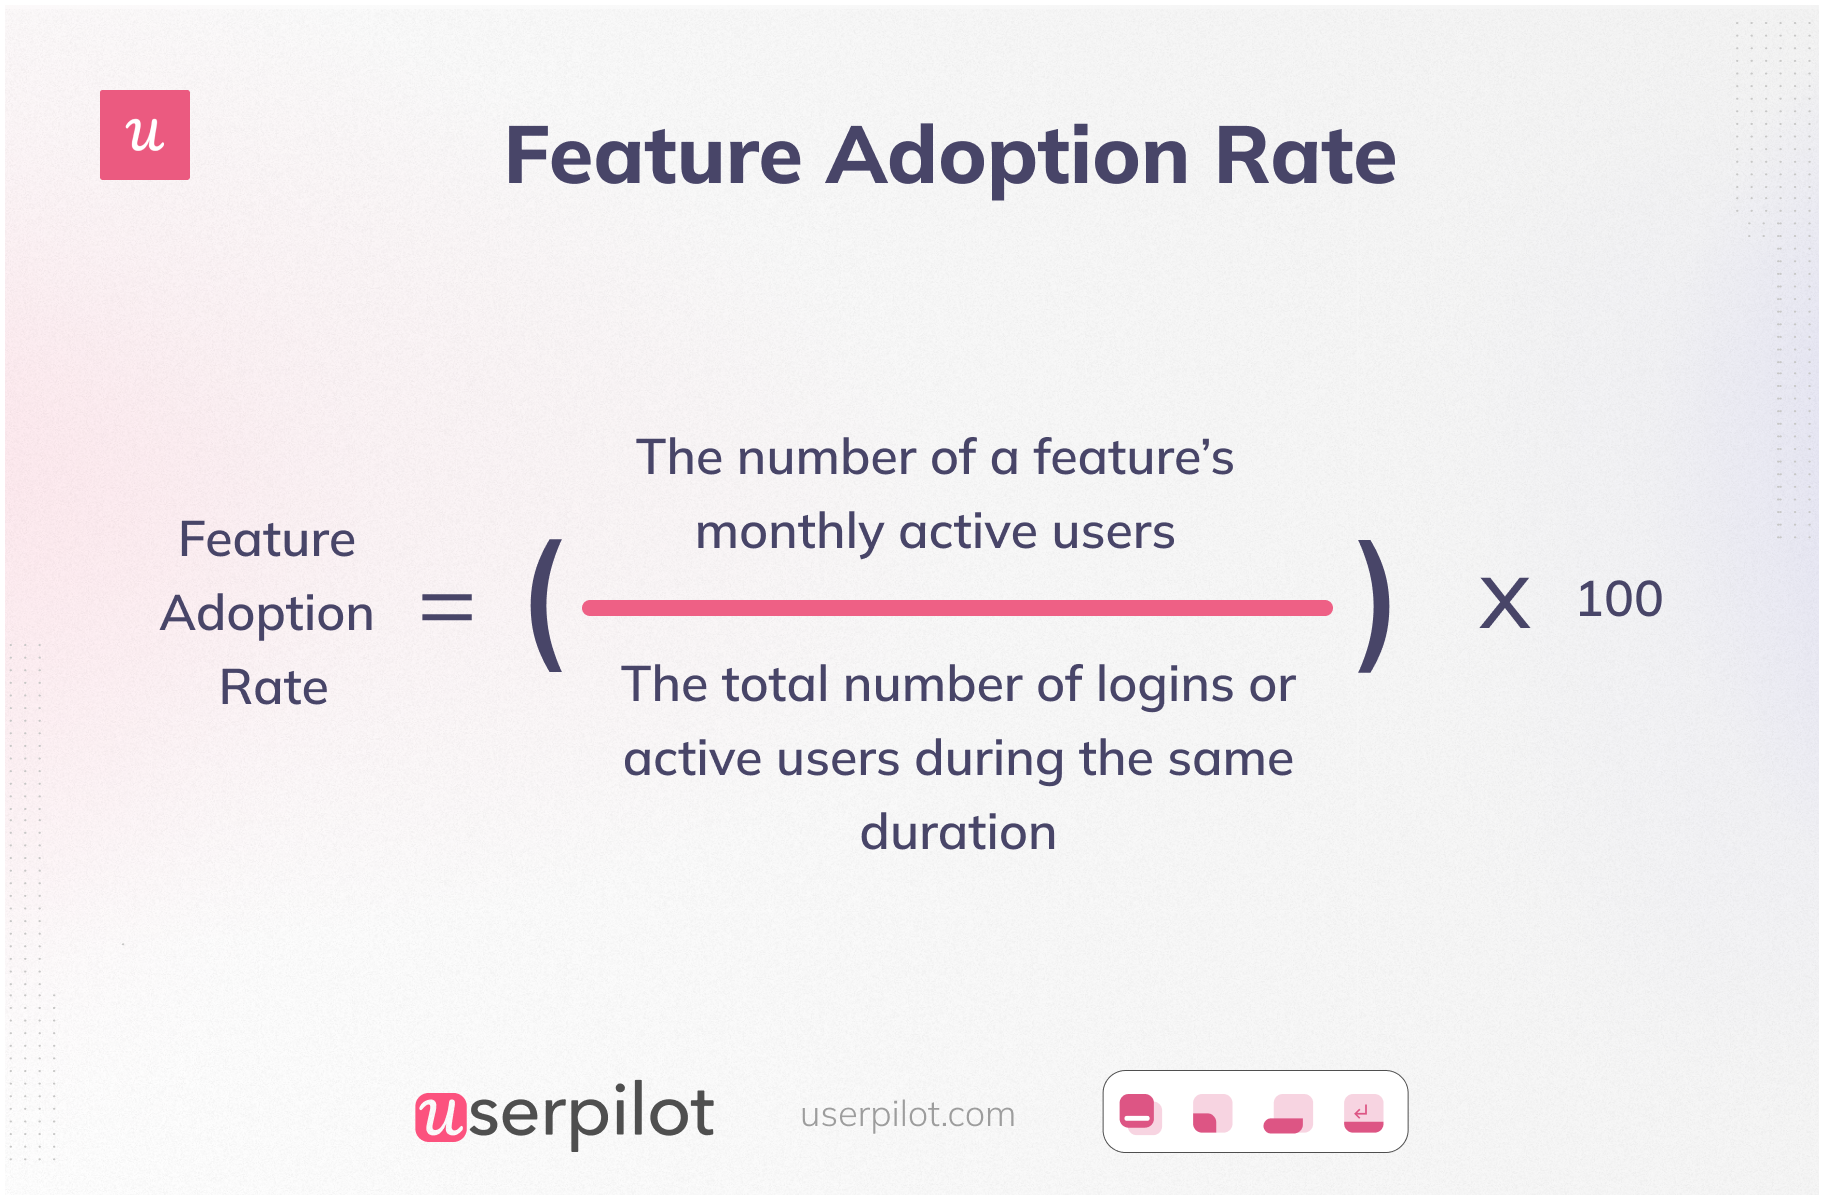 Feature adoption rate calculation